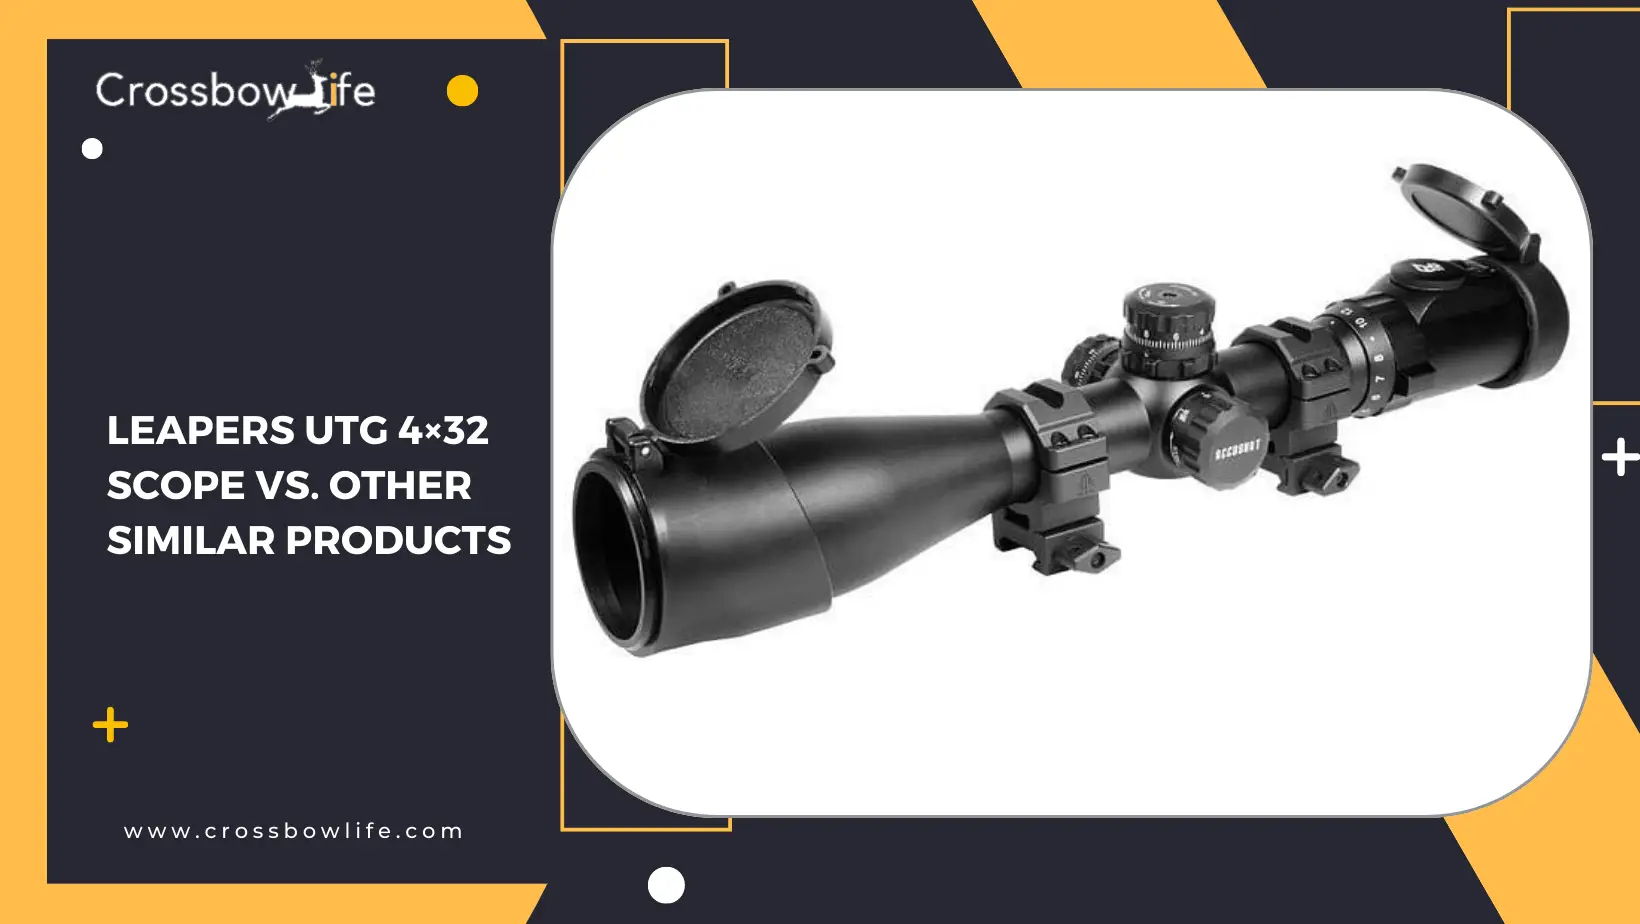 Leapers UTG 4×32 Scope: Built to Last A Lifetime